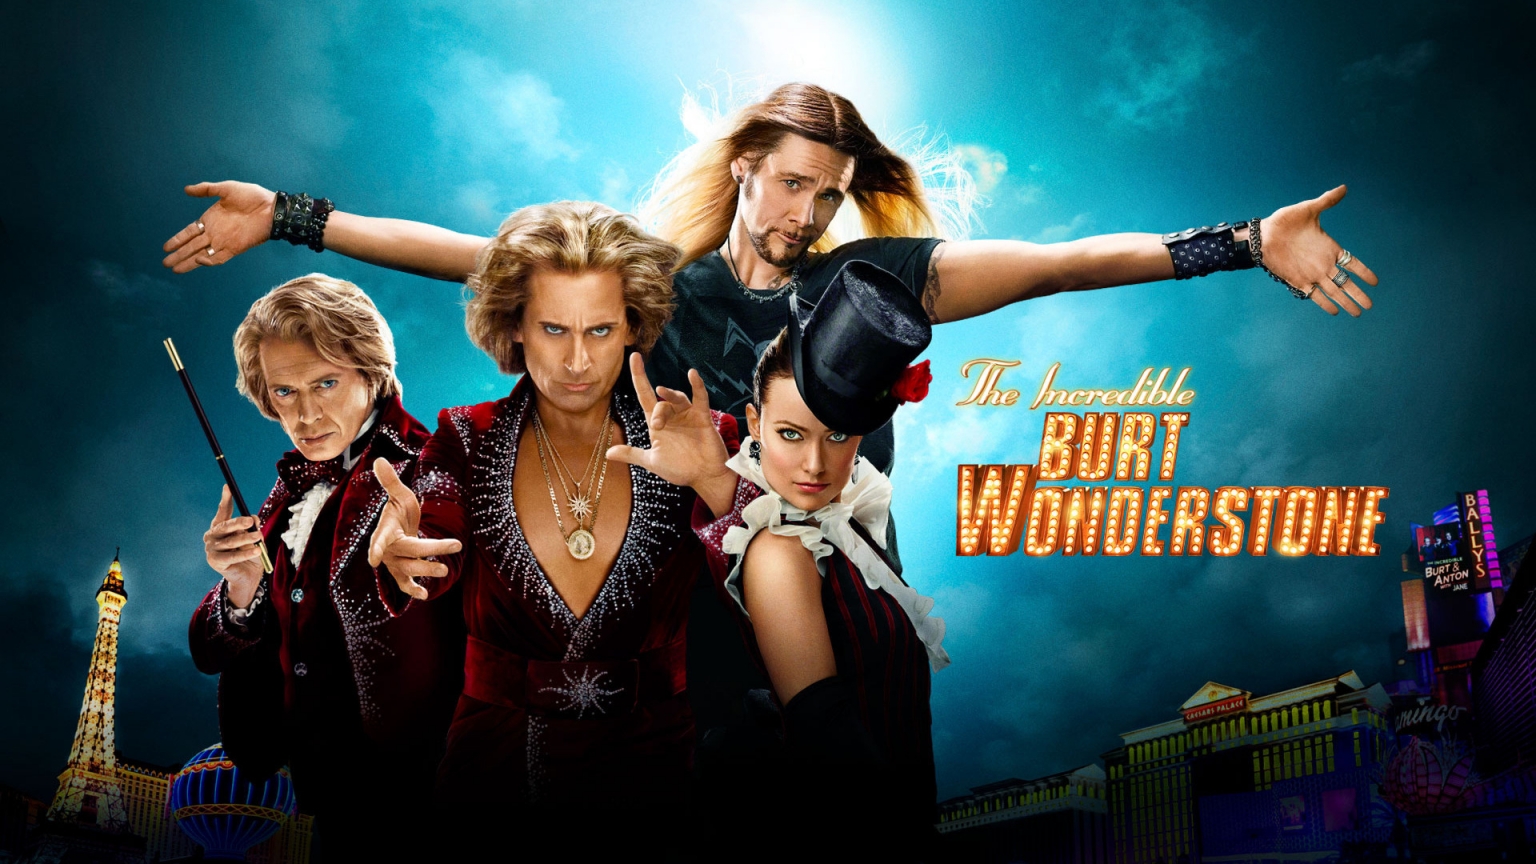 2013 The Incredible Burt Wonderstone Poster for 1536 x 864 HDTV resolution